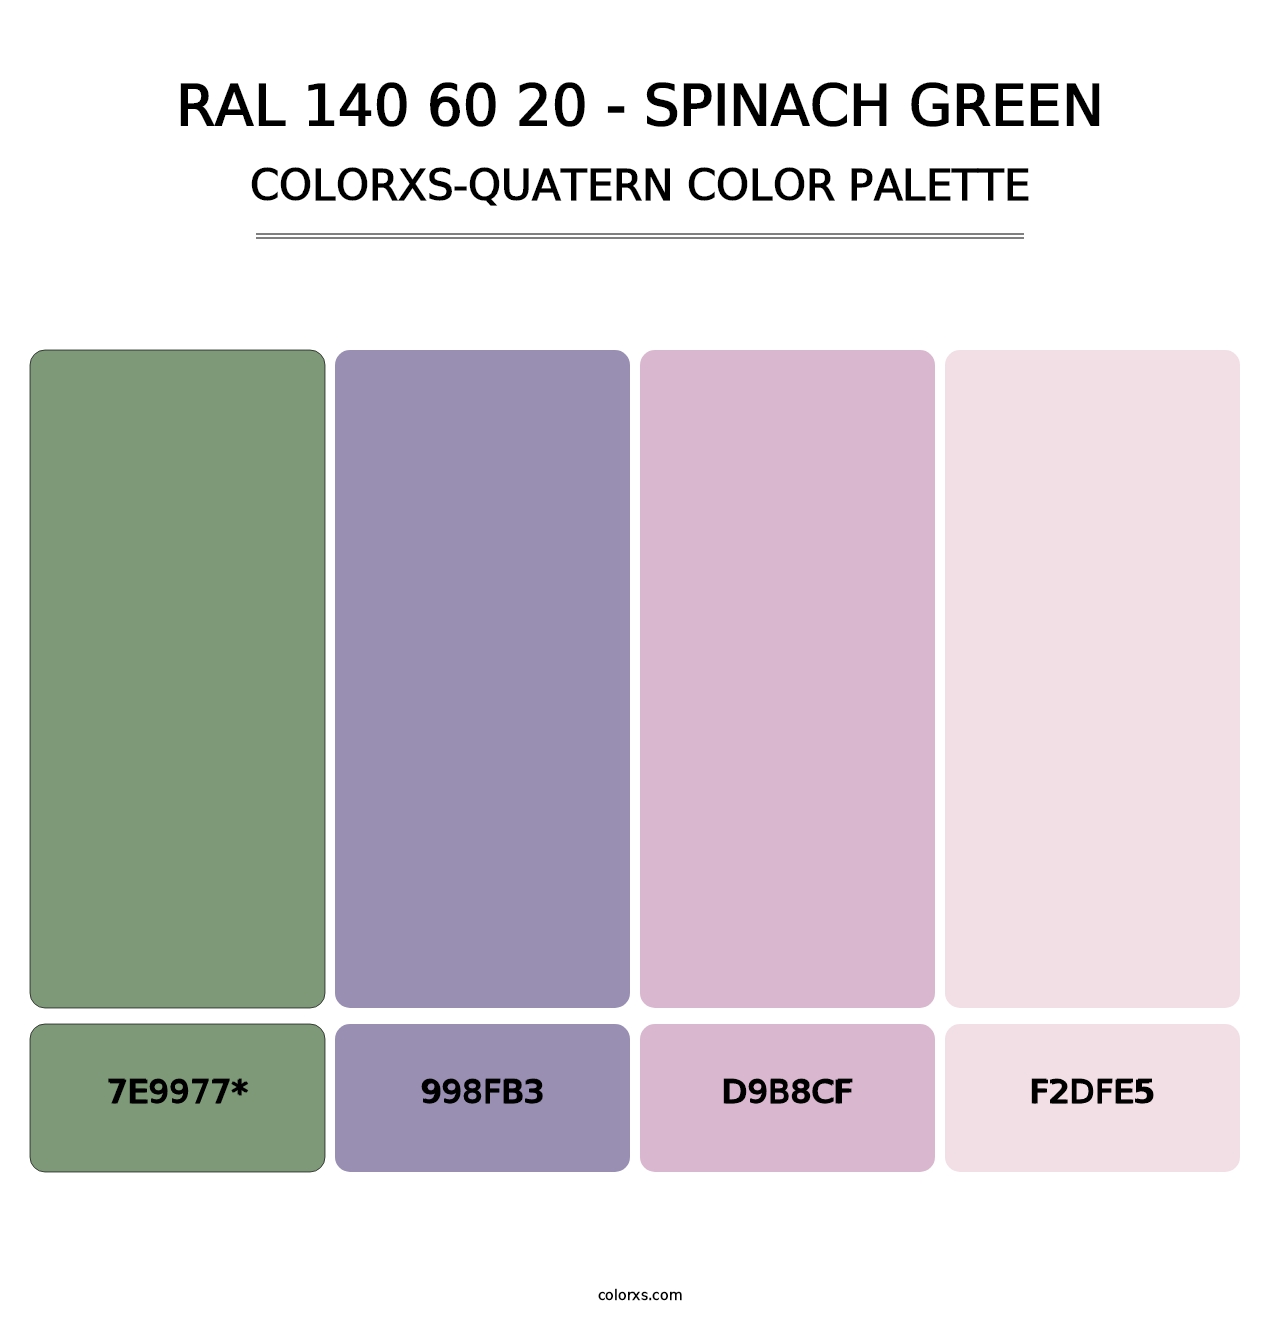 RAL 140 60 20 - Spinach Green - Colorxs Quatern Palette